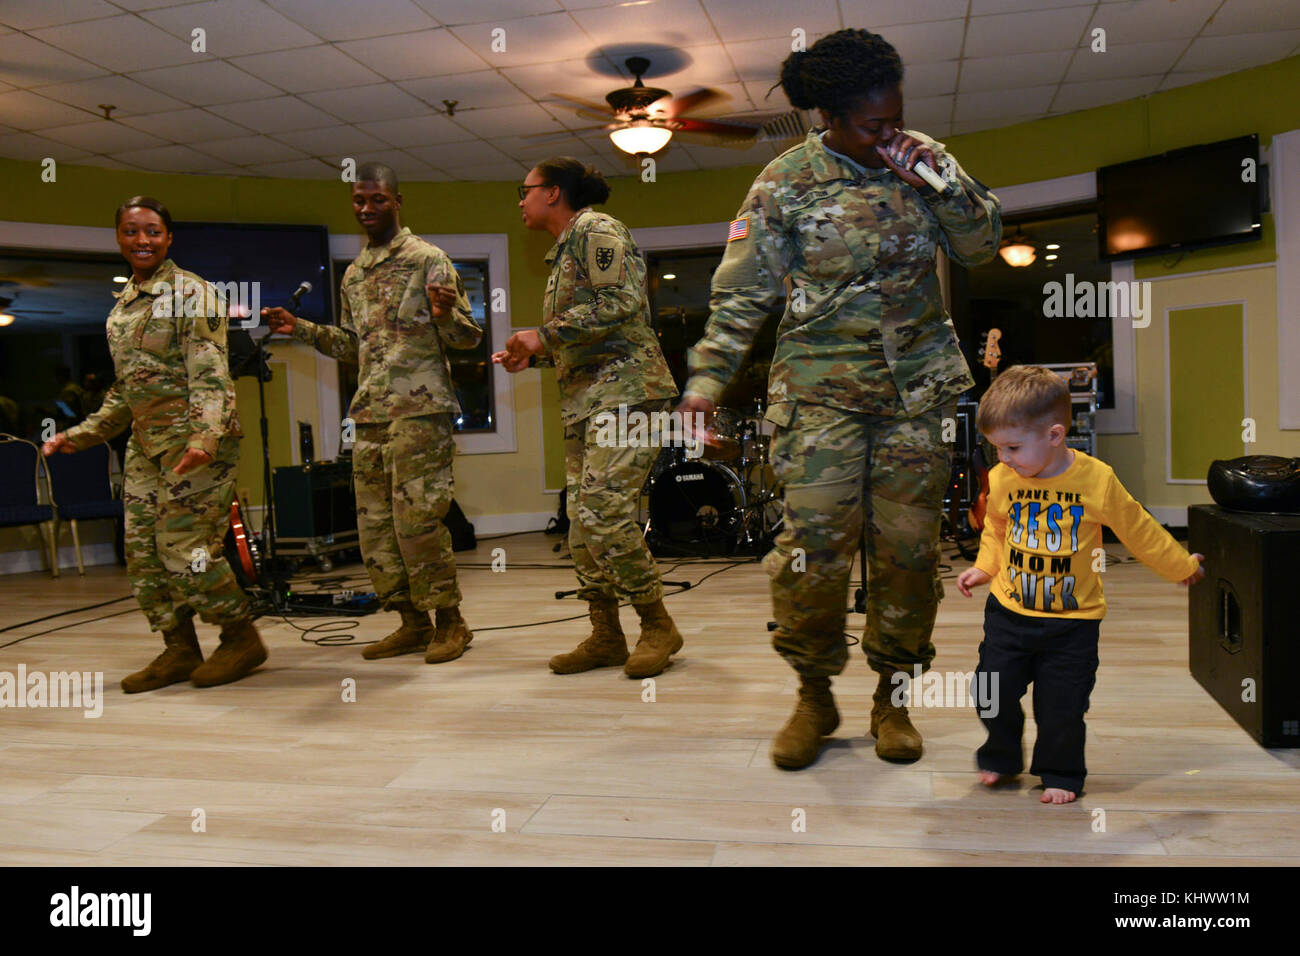 From left, U.S. Army Privates 1st Class Christian Everett and Keshawn Jones, Specialists Victoria Porter and Jalisa Sutton, Better Opportunities for Single Soldiers (BOSS) members, perform with 2-year-old Jadon Keller, Gold Star family member, during the seventh annual “Thanks for Giving” holiday social for Gold Star families talent show at Joint Base Langley-Eustis, Va., Nov. 16, 2017. The event was hosted by Survivor Outreach Services to let Gold Star families know their sacrifice is not forgotten. (U.S. Air Force photo by Tech. Sgt. Katie Gar Ward) Stock Photo